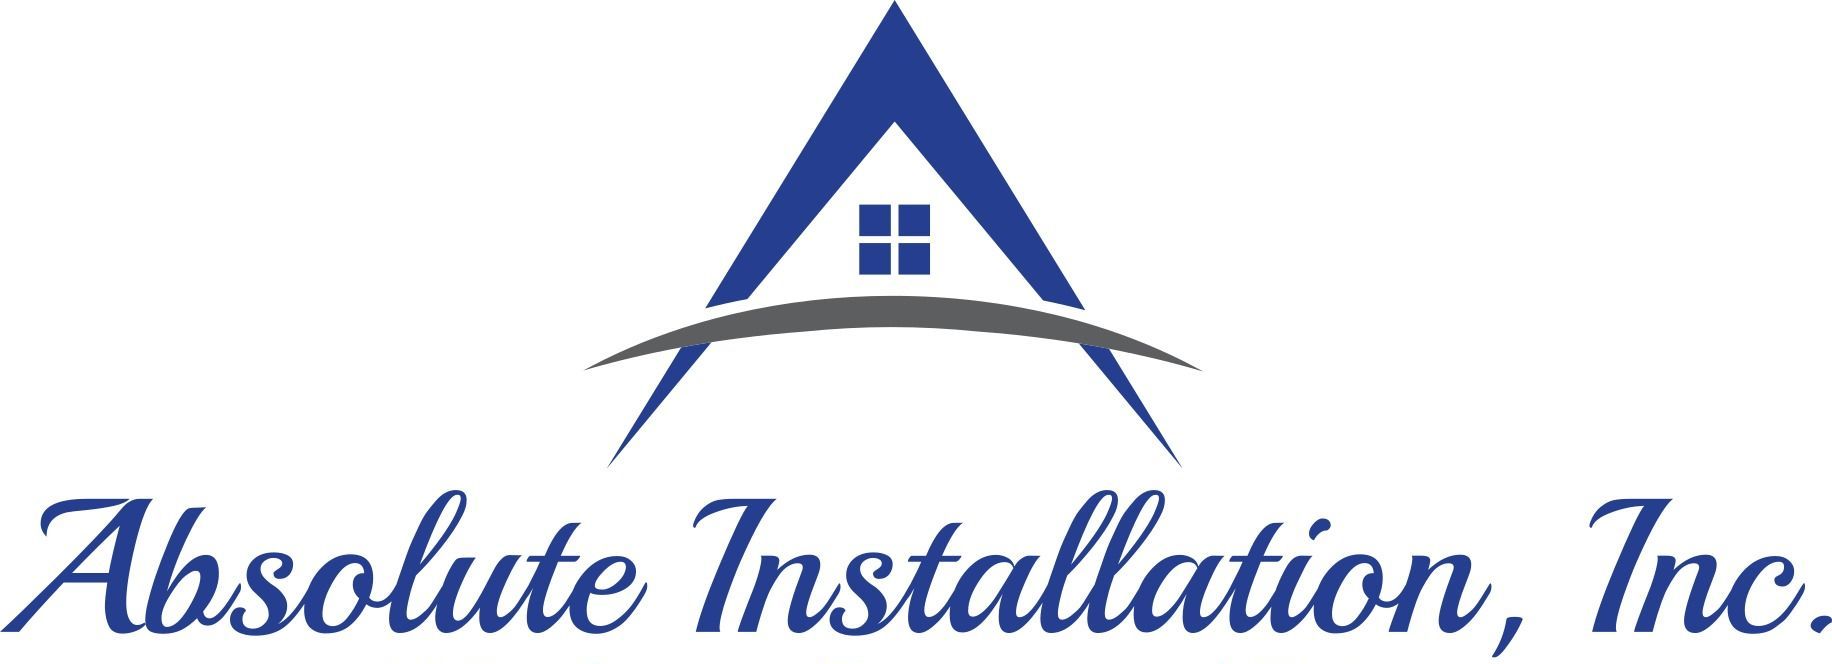 Absolute Installation, Inc.